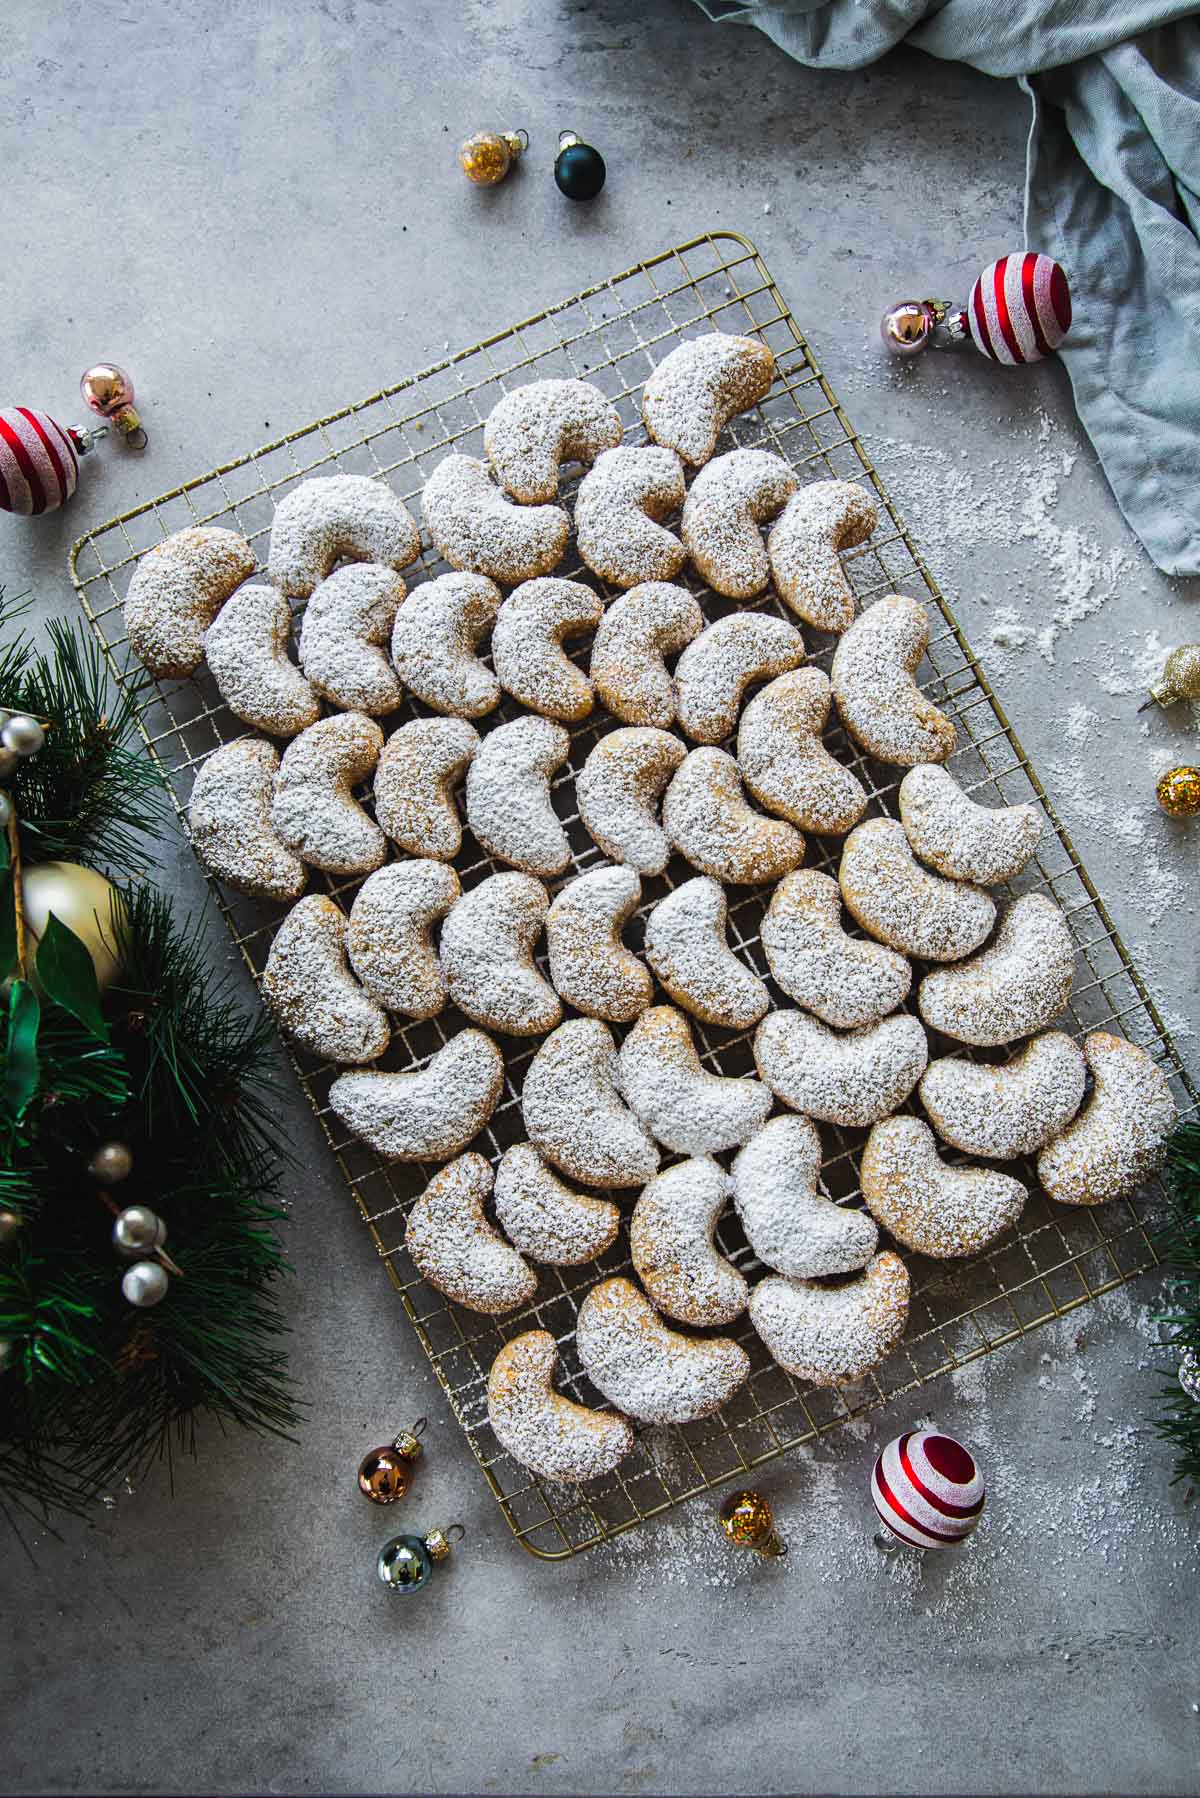 Kourabiedes - Greek Almond Crescent Cookies dusted with icing sugar on a wire rack surrounded by Christmas wreath and ornaments.